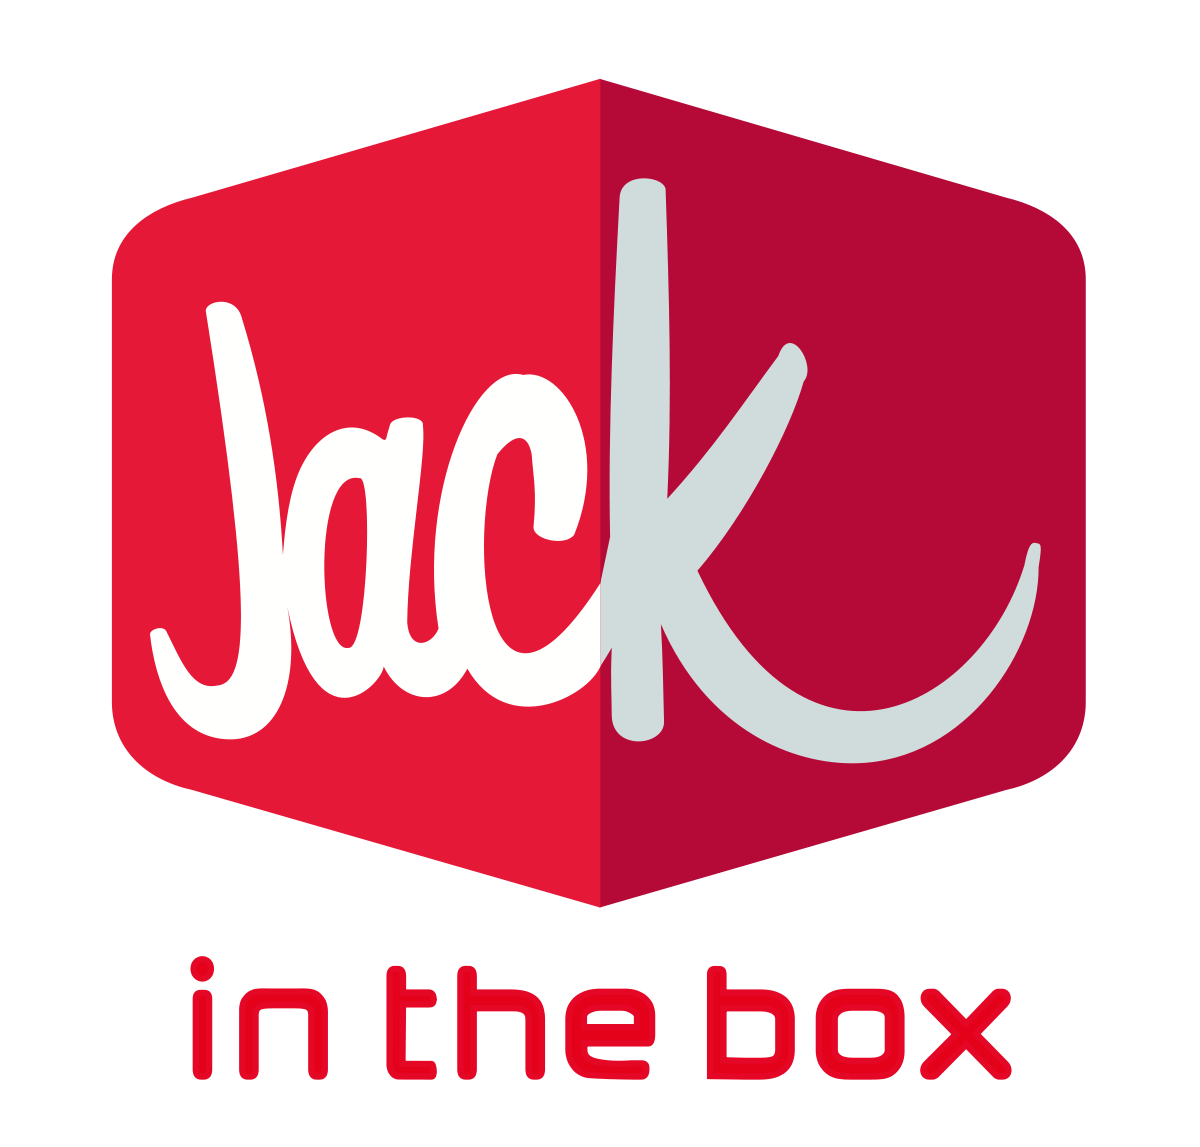 Fast Food Store Logo - Jack in the Box